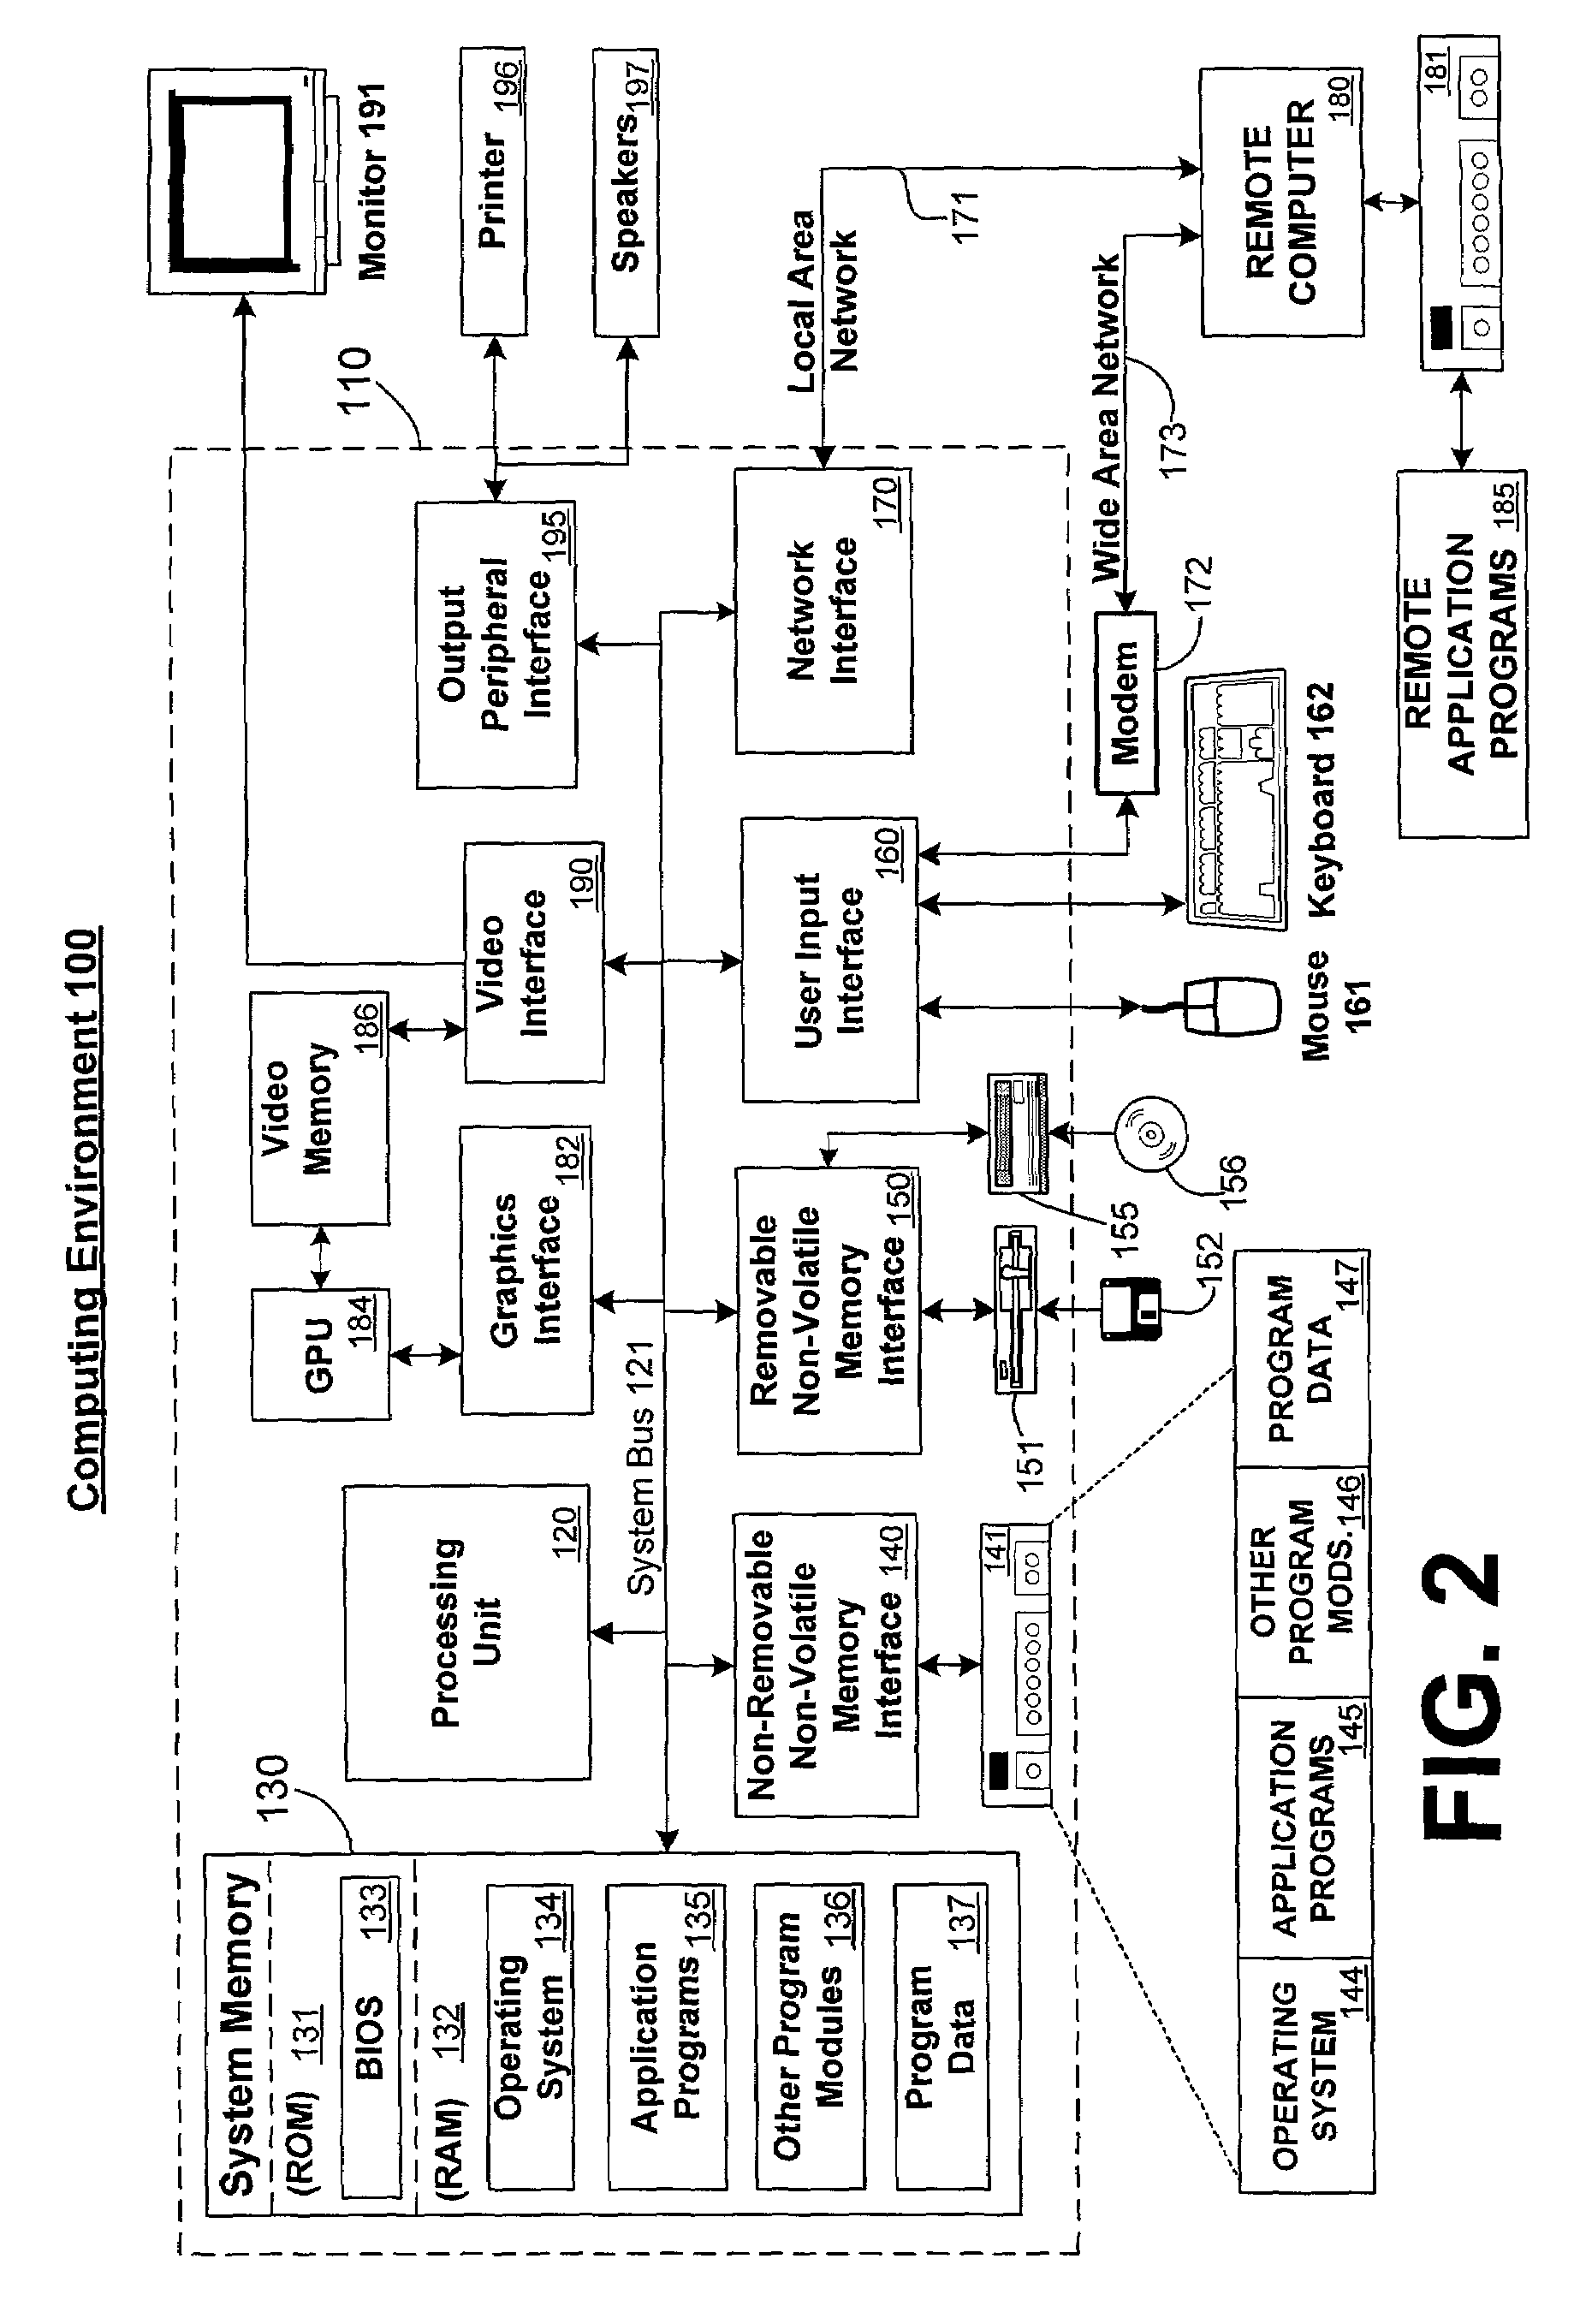 Systems and methods for managing drivers in a computing system